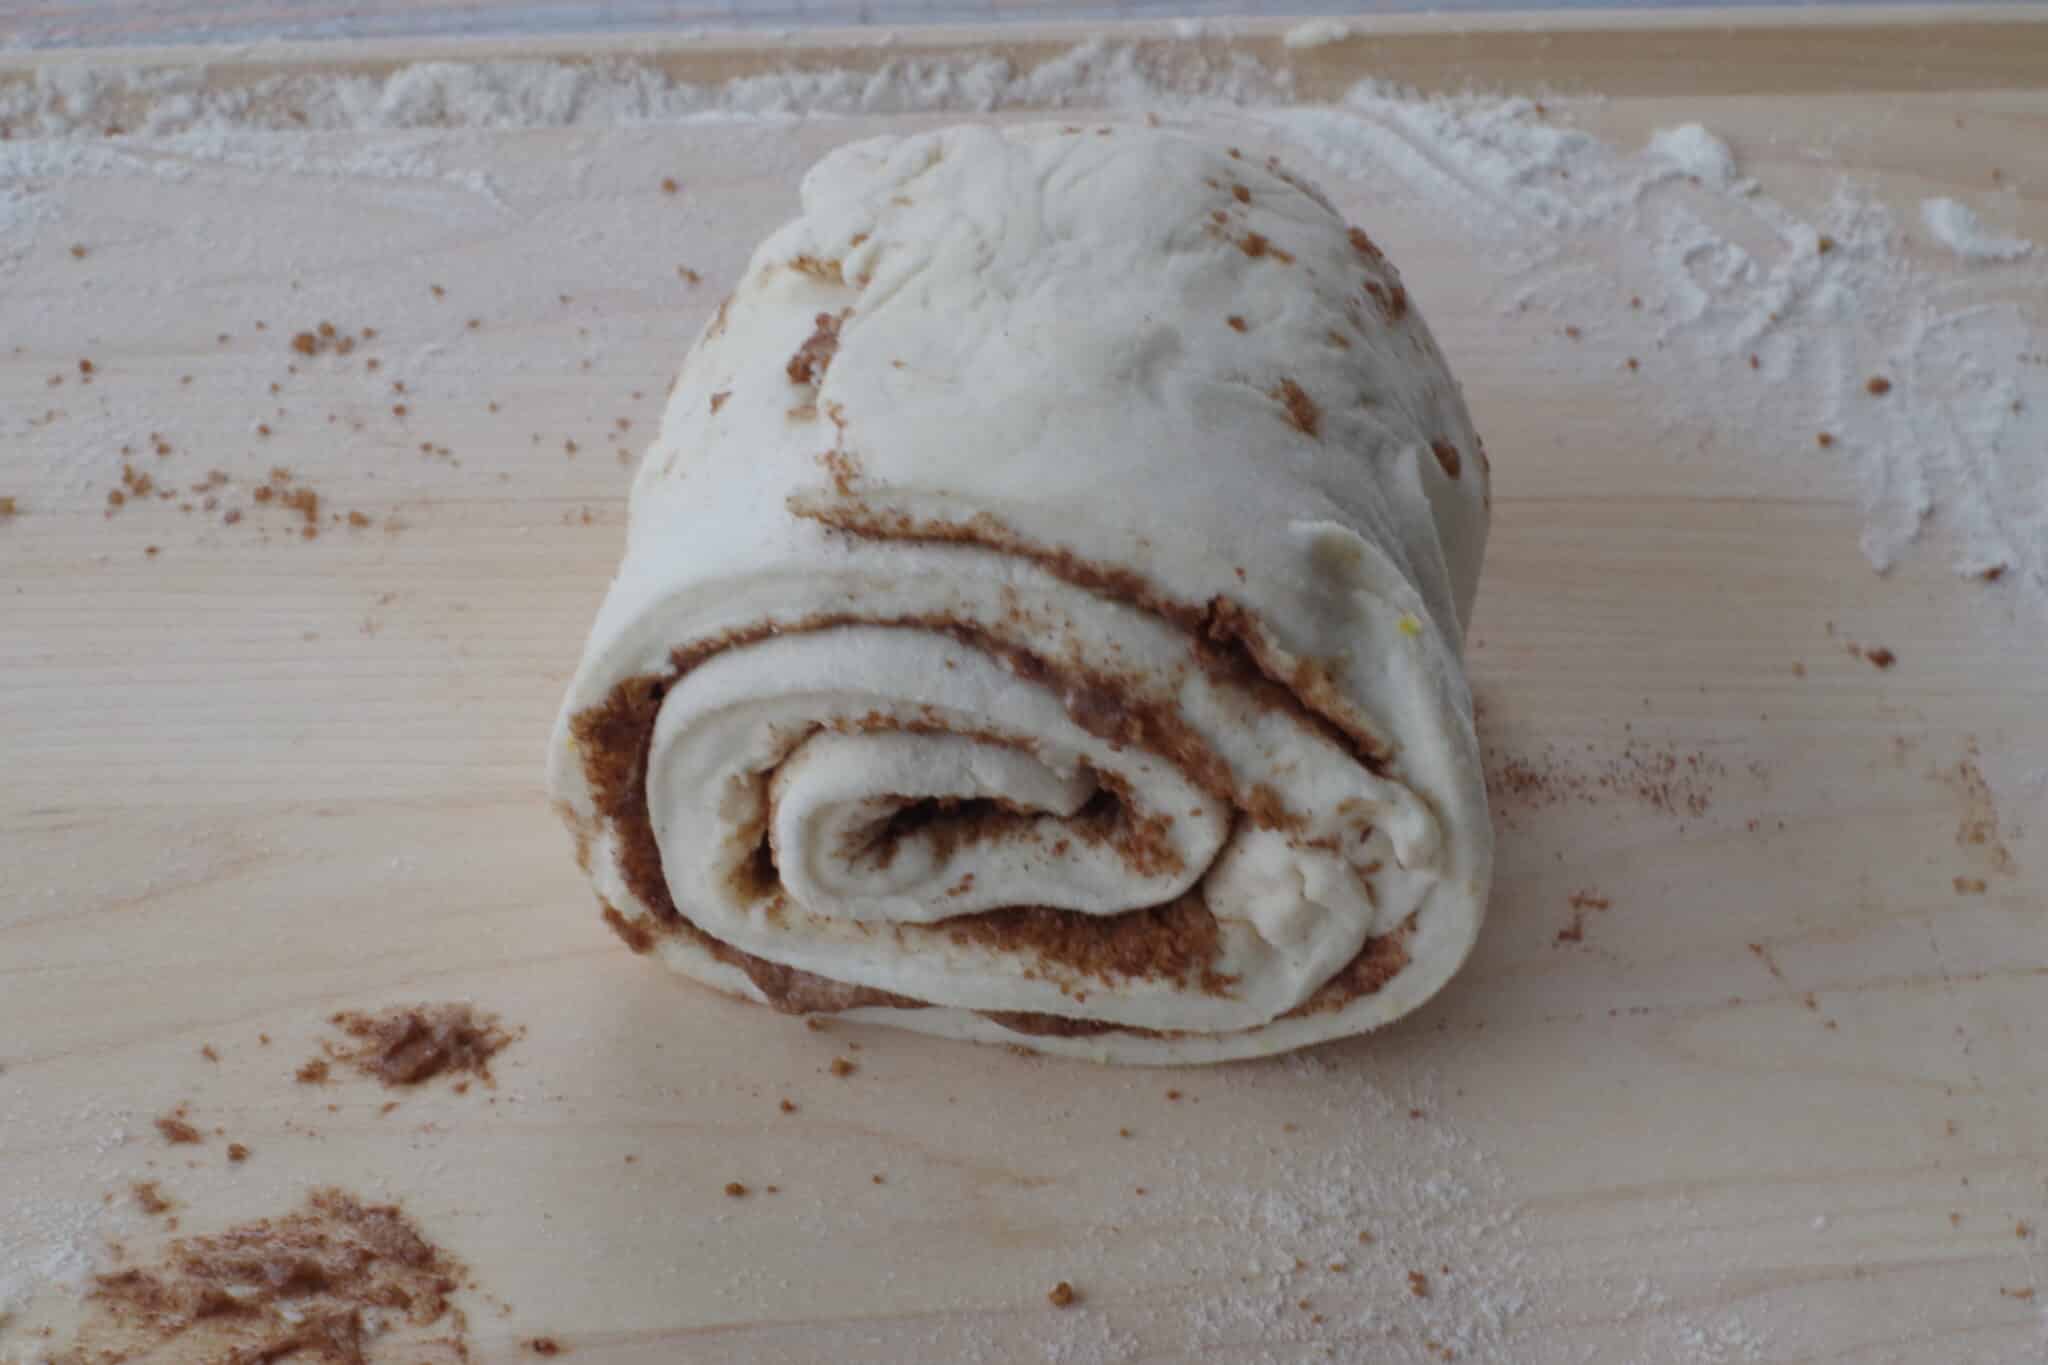 2 strips of dough rolled all the way up